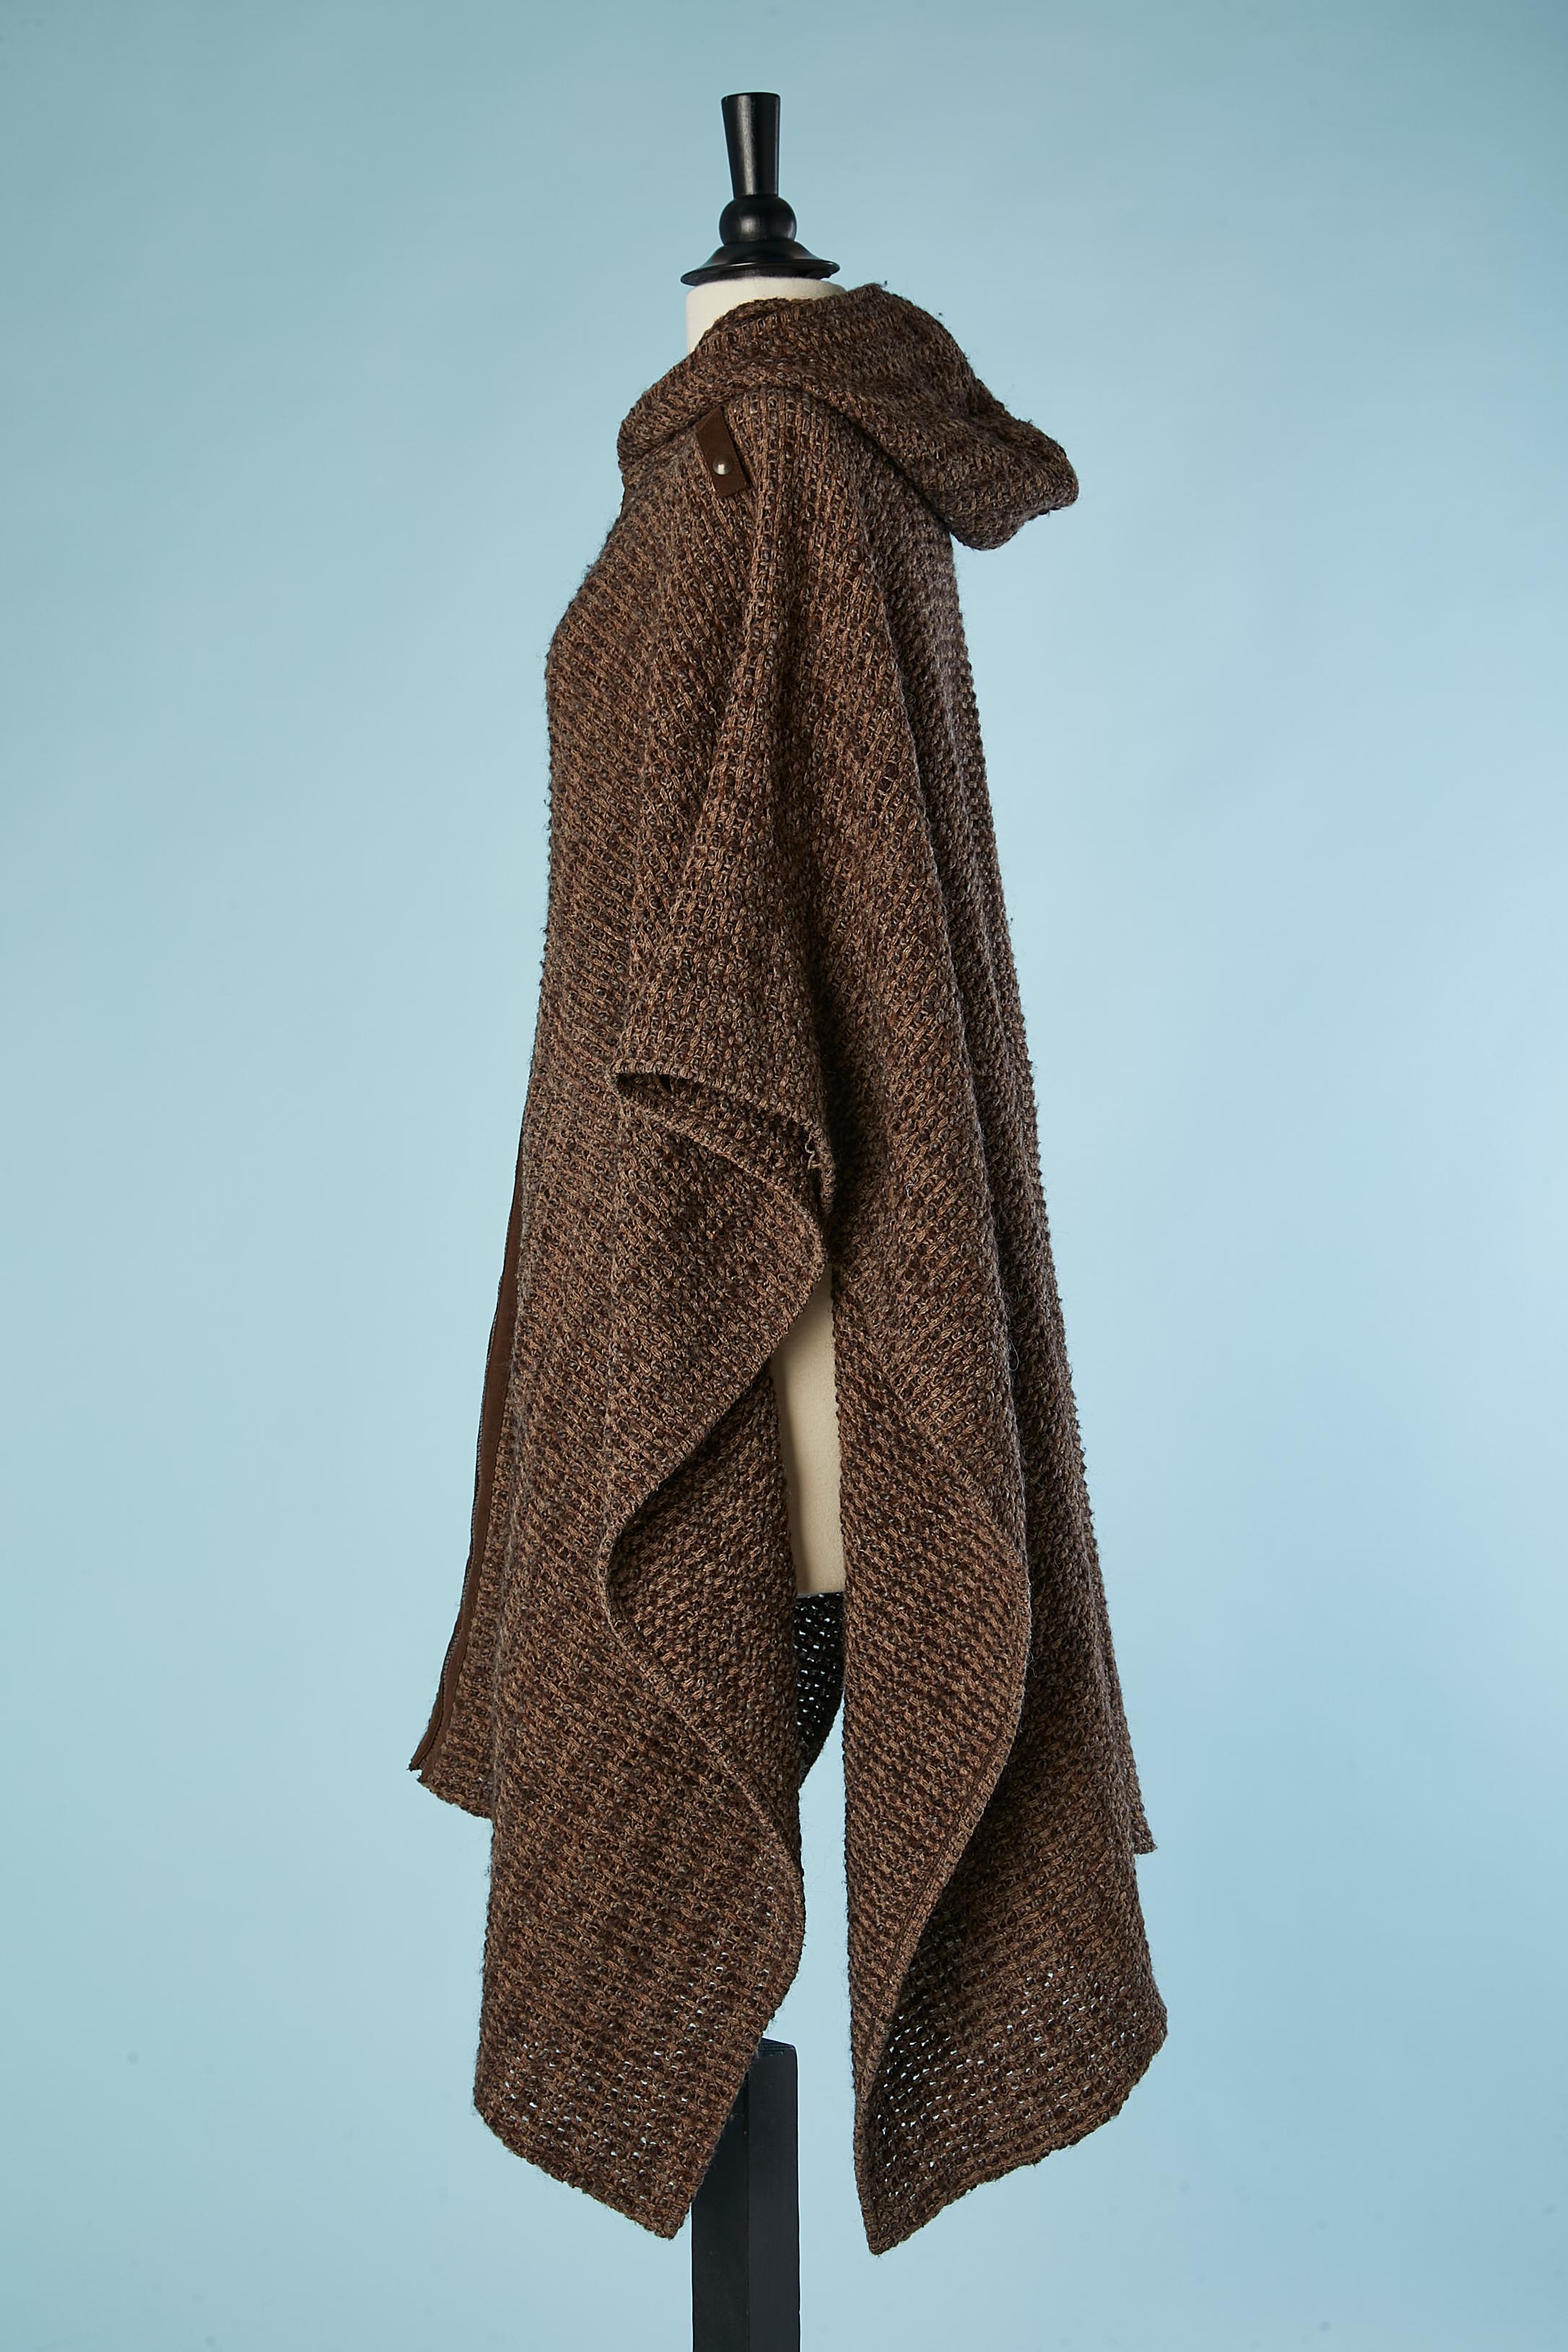 Hooded brown chiné cape in woven wool with middle front zip Daniel Hechter  In Excellent Condition For Sale In Saint-Ouen-Sur-Seine, FR